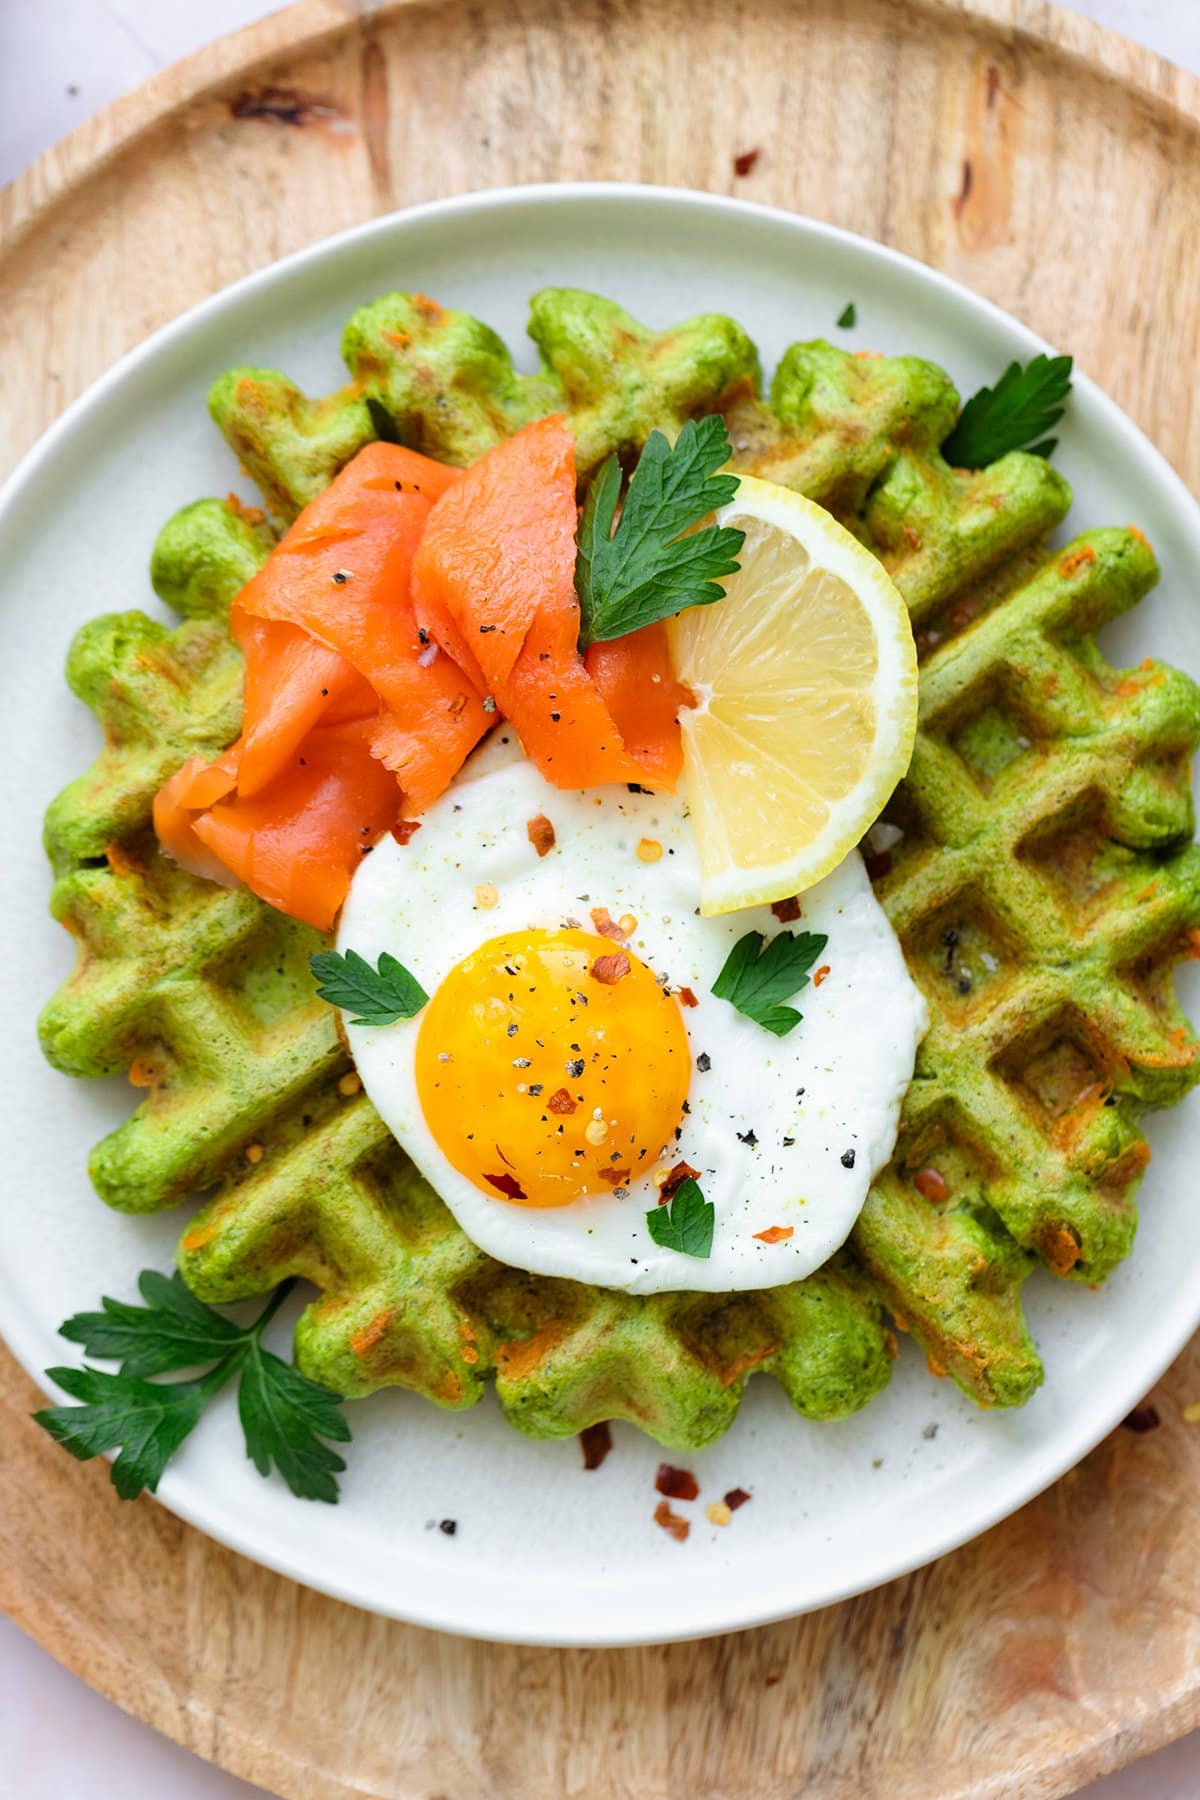 Green waffles on a white plate topped with a sunny side up egg, smoked salmon, fresh parsley, and a wedge of lemon.